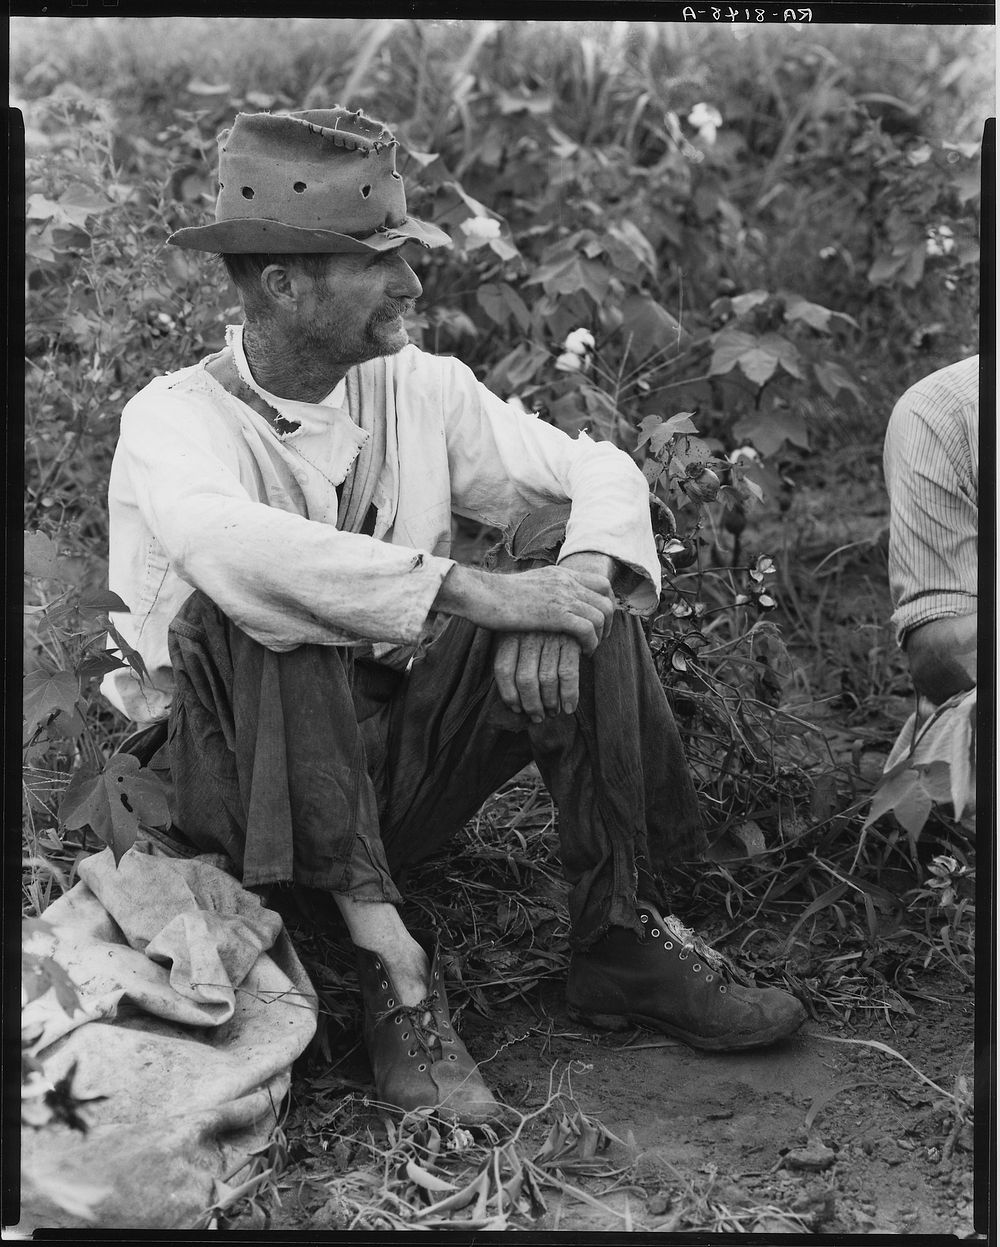 Bud Fields in his cotton patch. Hale County, Alabama. Sourced from the Library of Congress.